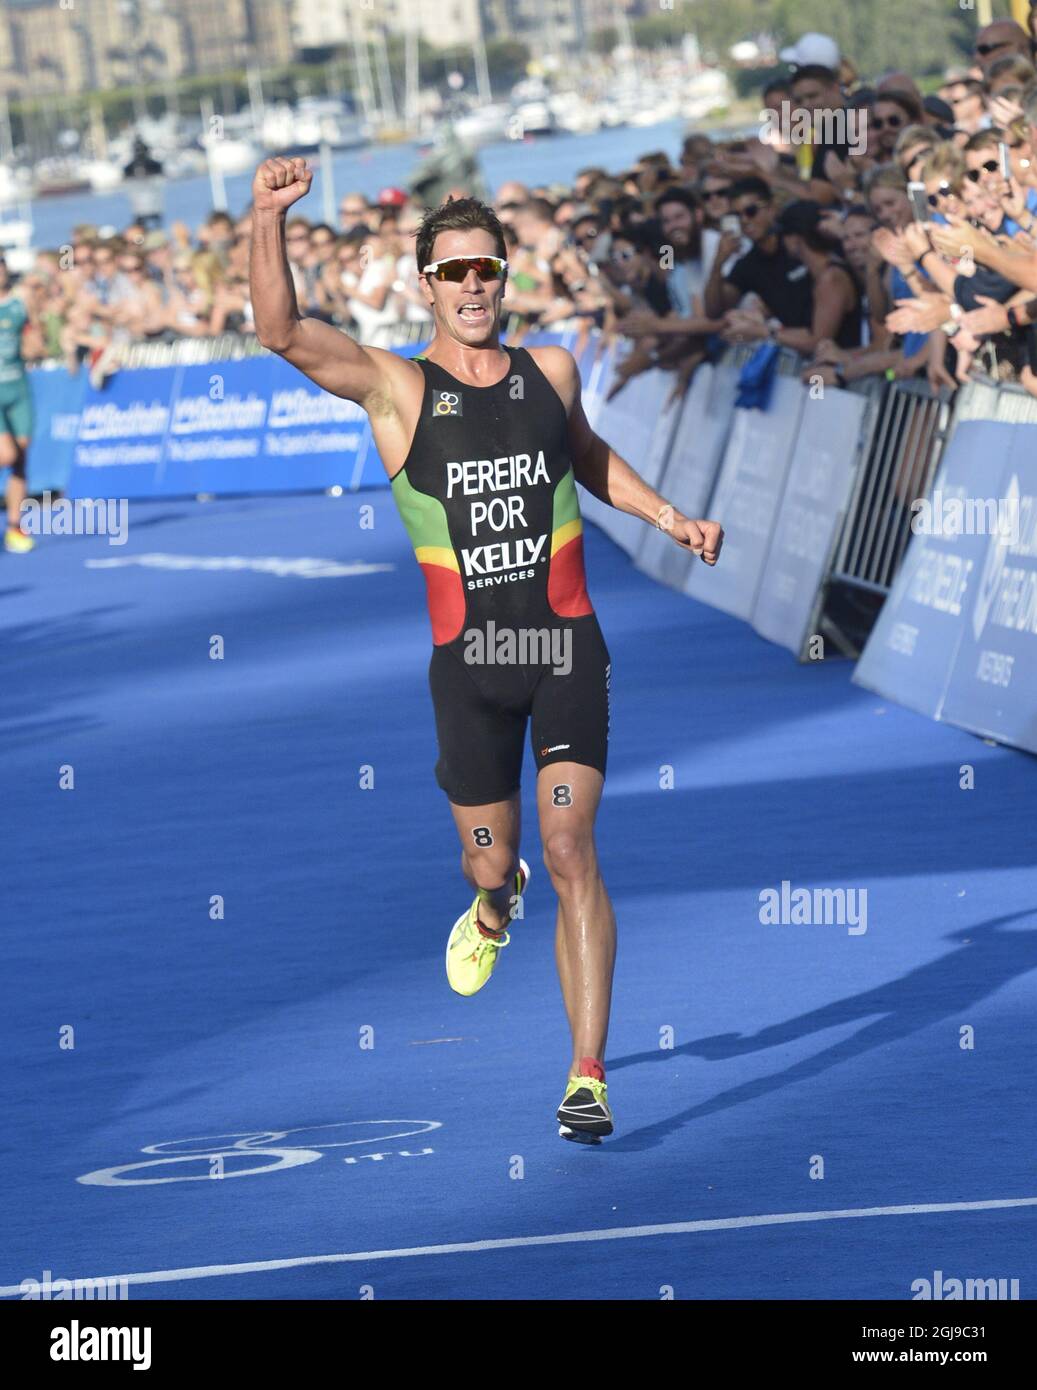 STOCKHOLM 2015-08-22 Joao Pereira of Portugal palced second at the men's Olympic distance of the 2015 ITU World Triathlon in Stockholm, Sweden, August 23, 2018. Photo: Jonas Ekstromer / TT / Kod 10080 ** SWEDEN OUT ** Stock Photo